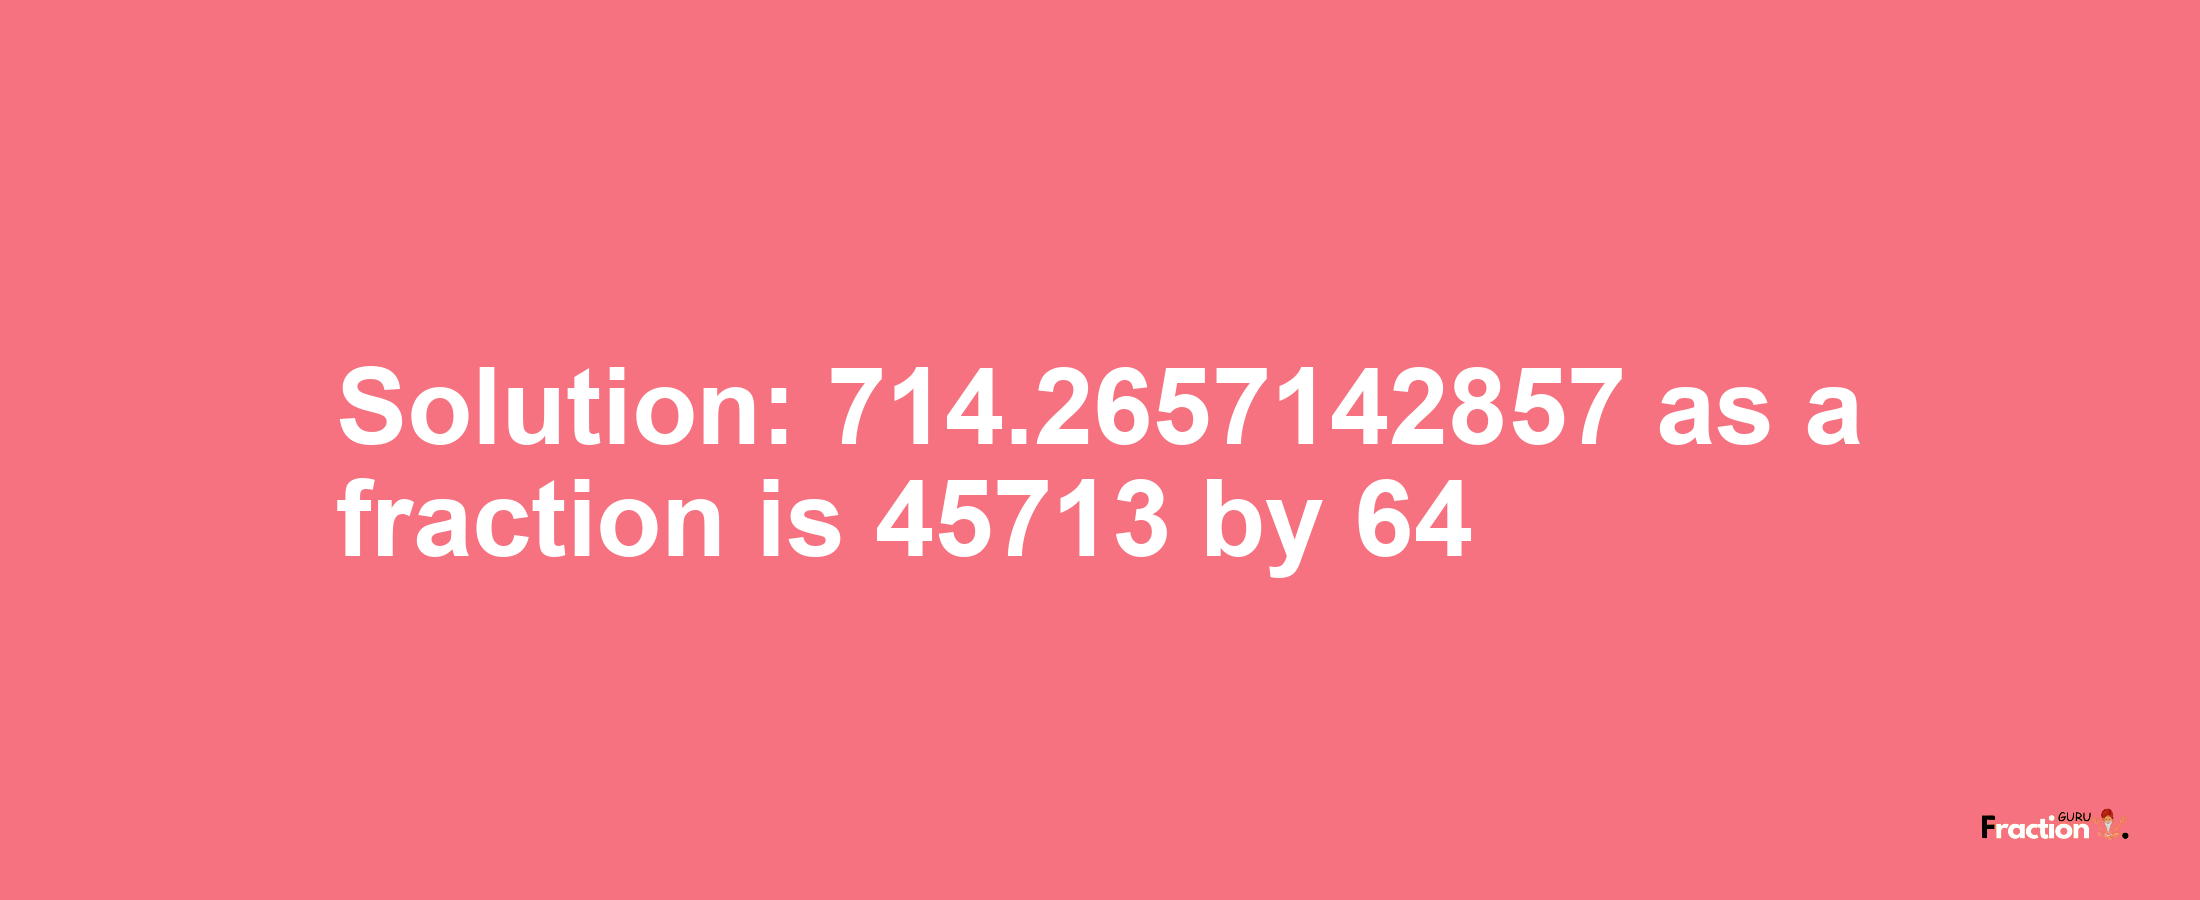 Solution:714.2657142857 as a fraction is 45713/64